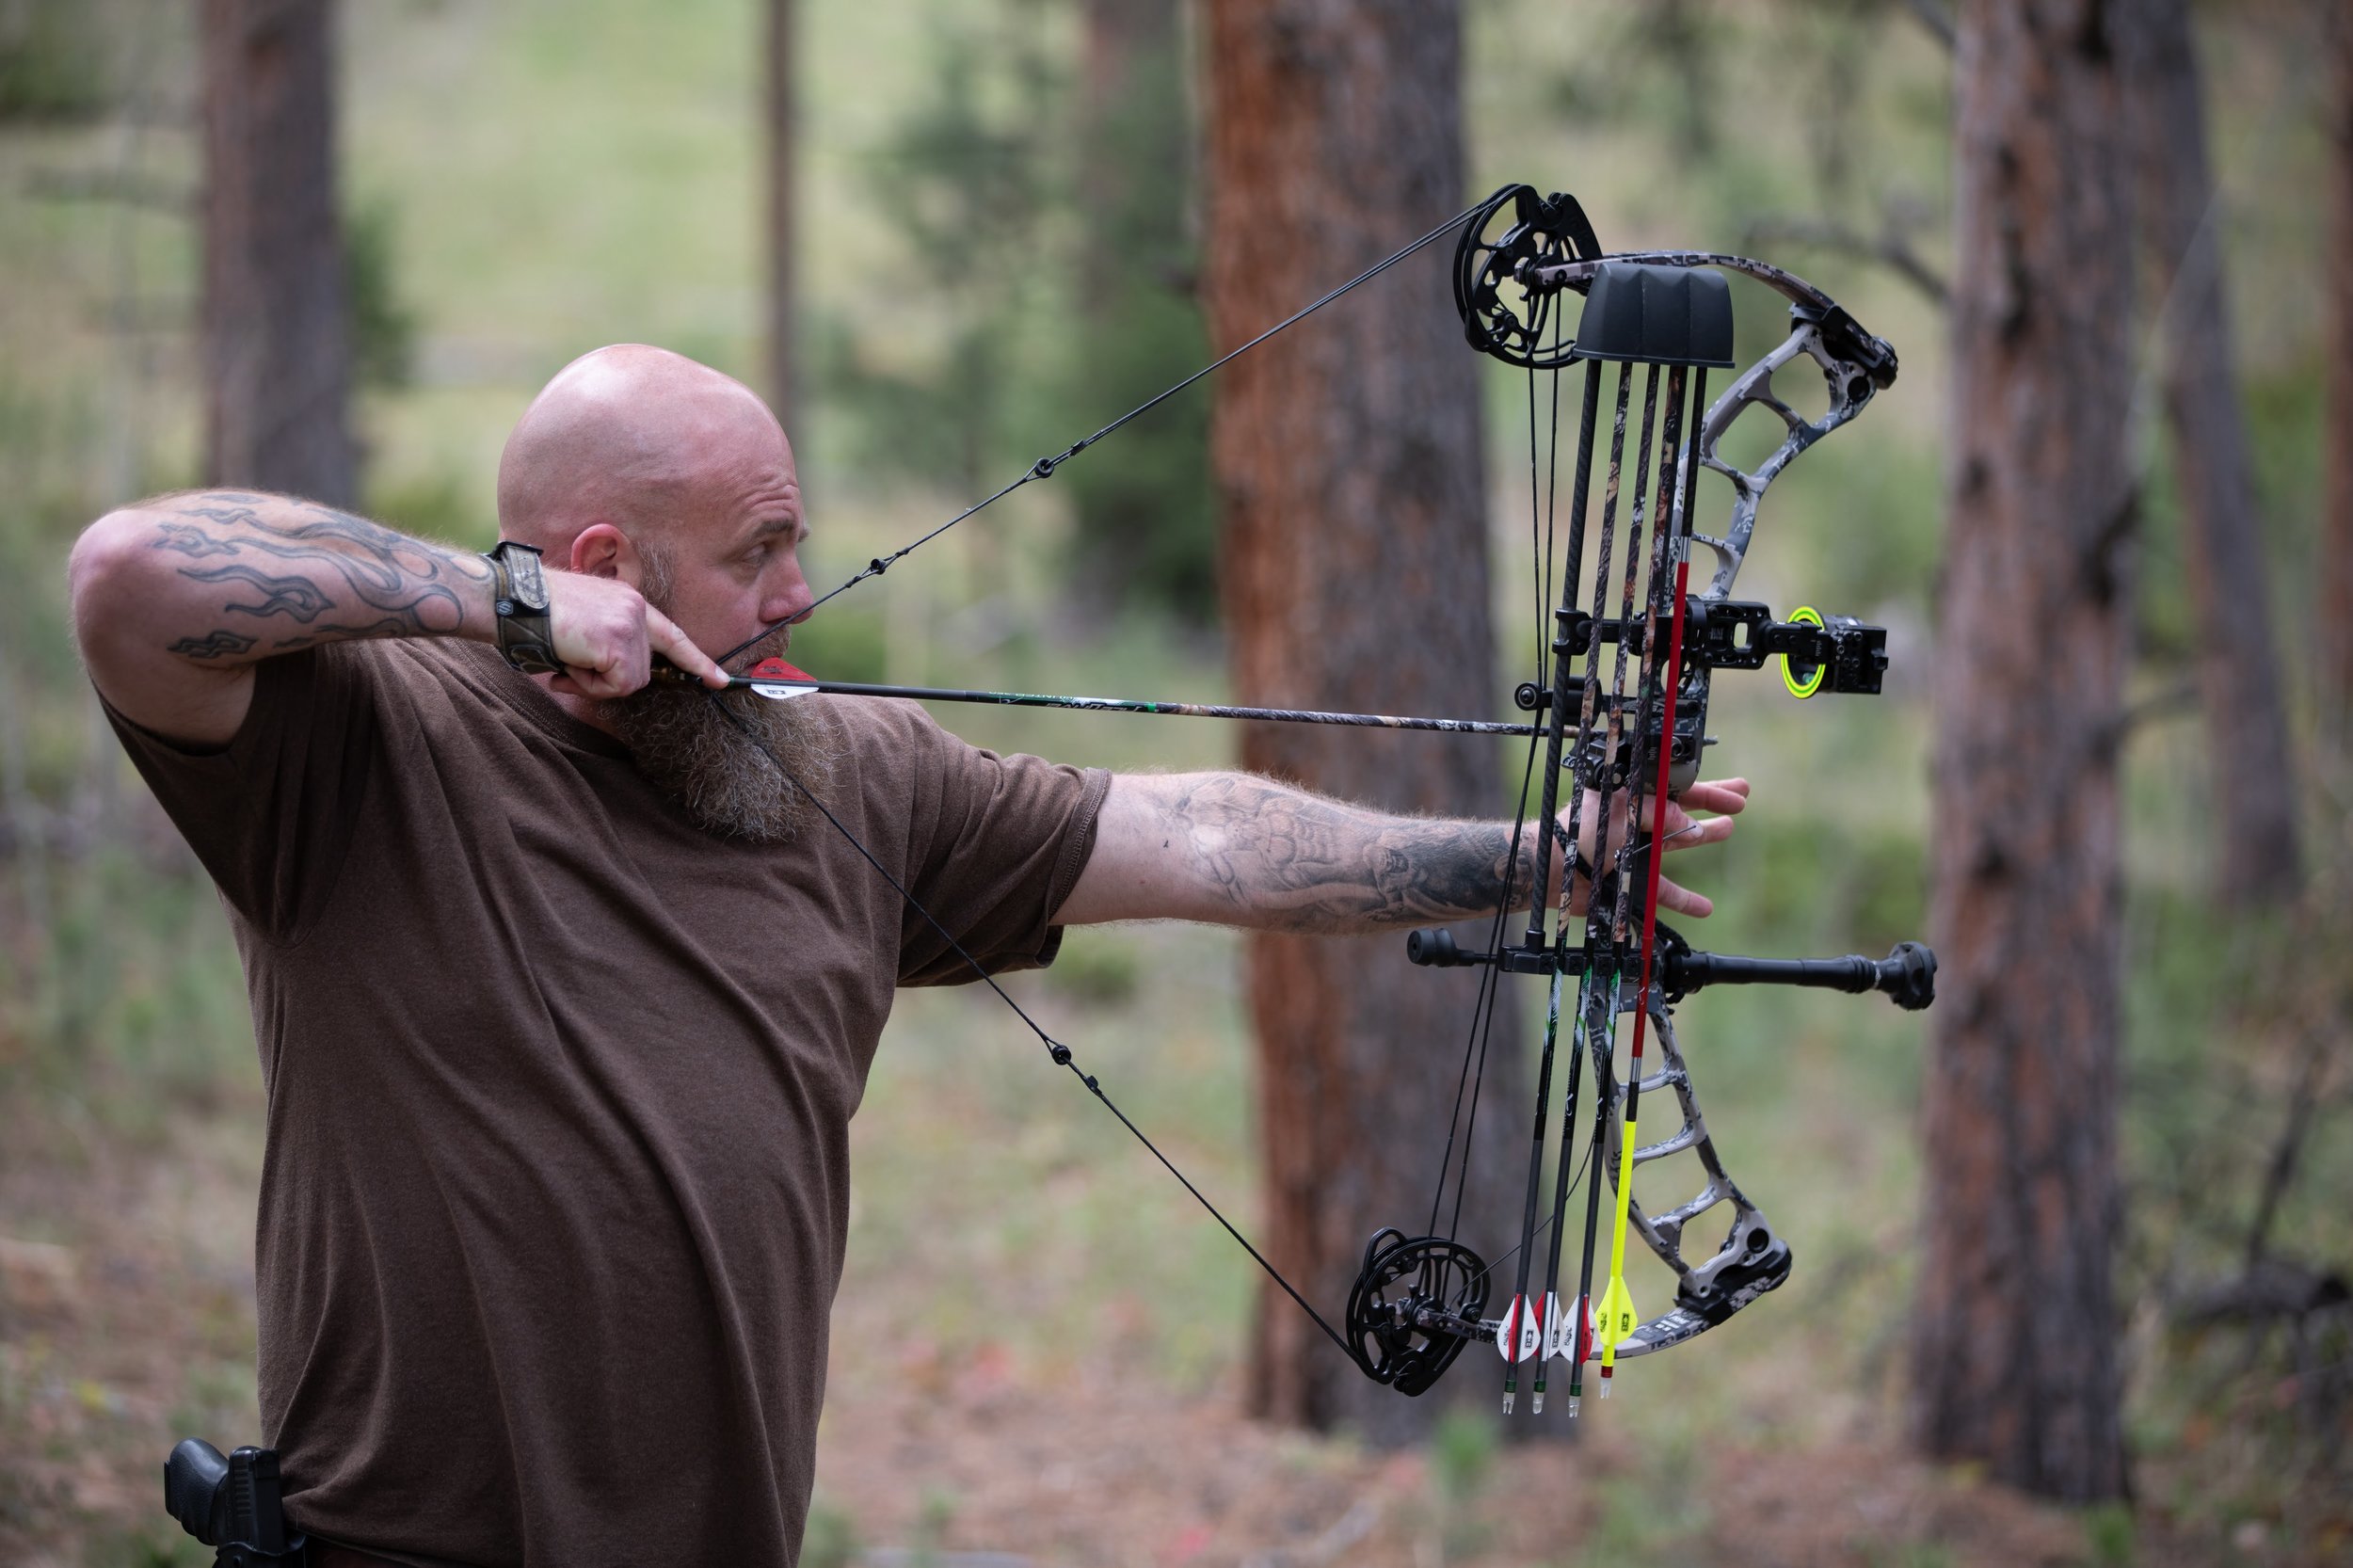 Archery improves your focus, muscle memory, hand-eye coordination and most importantly extends your hunting season.